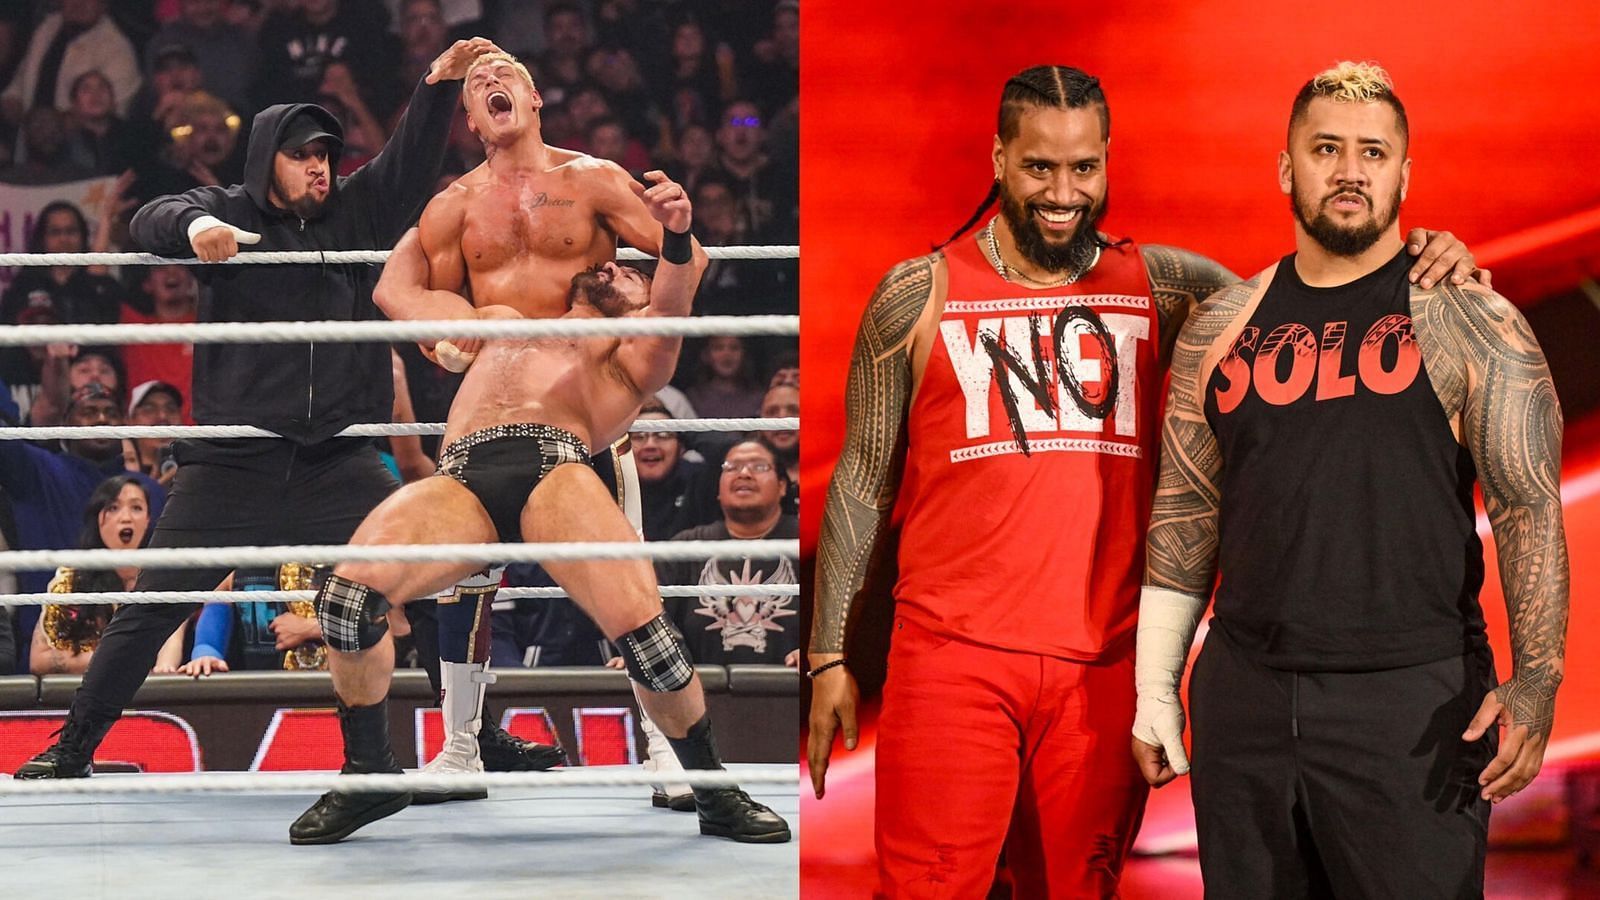 Solo Sikoa and Jimmy Uso showed up on RAW this week!